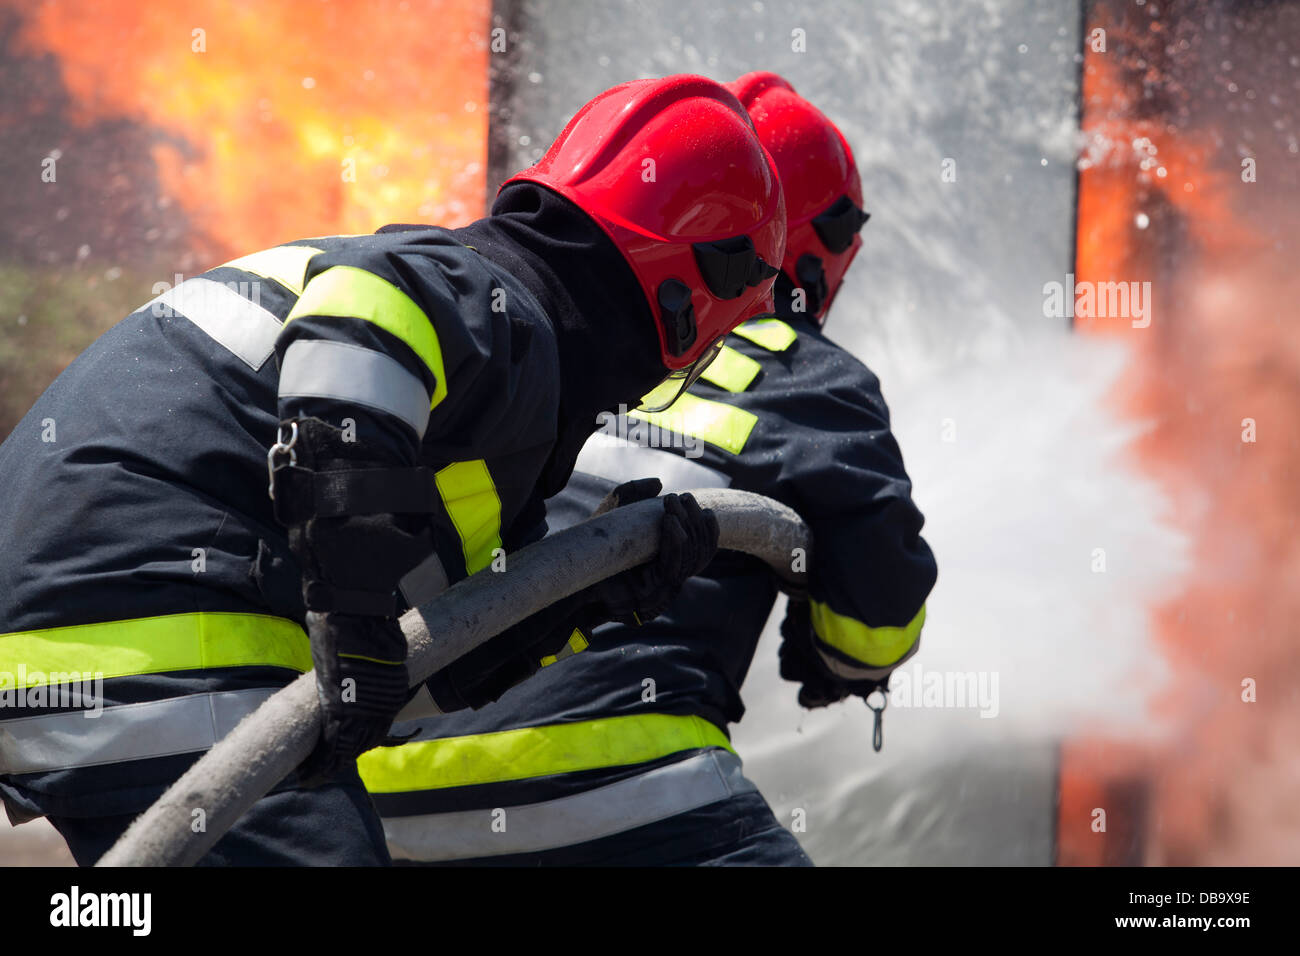 firefighters fighting fire Stock Photo